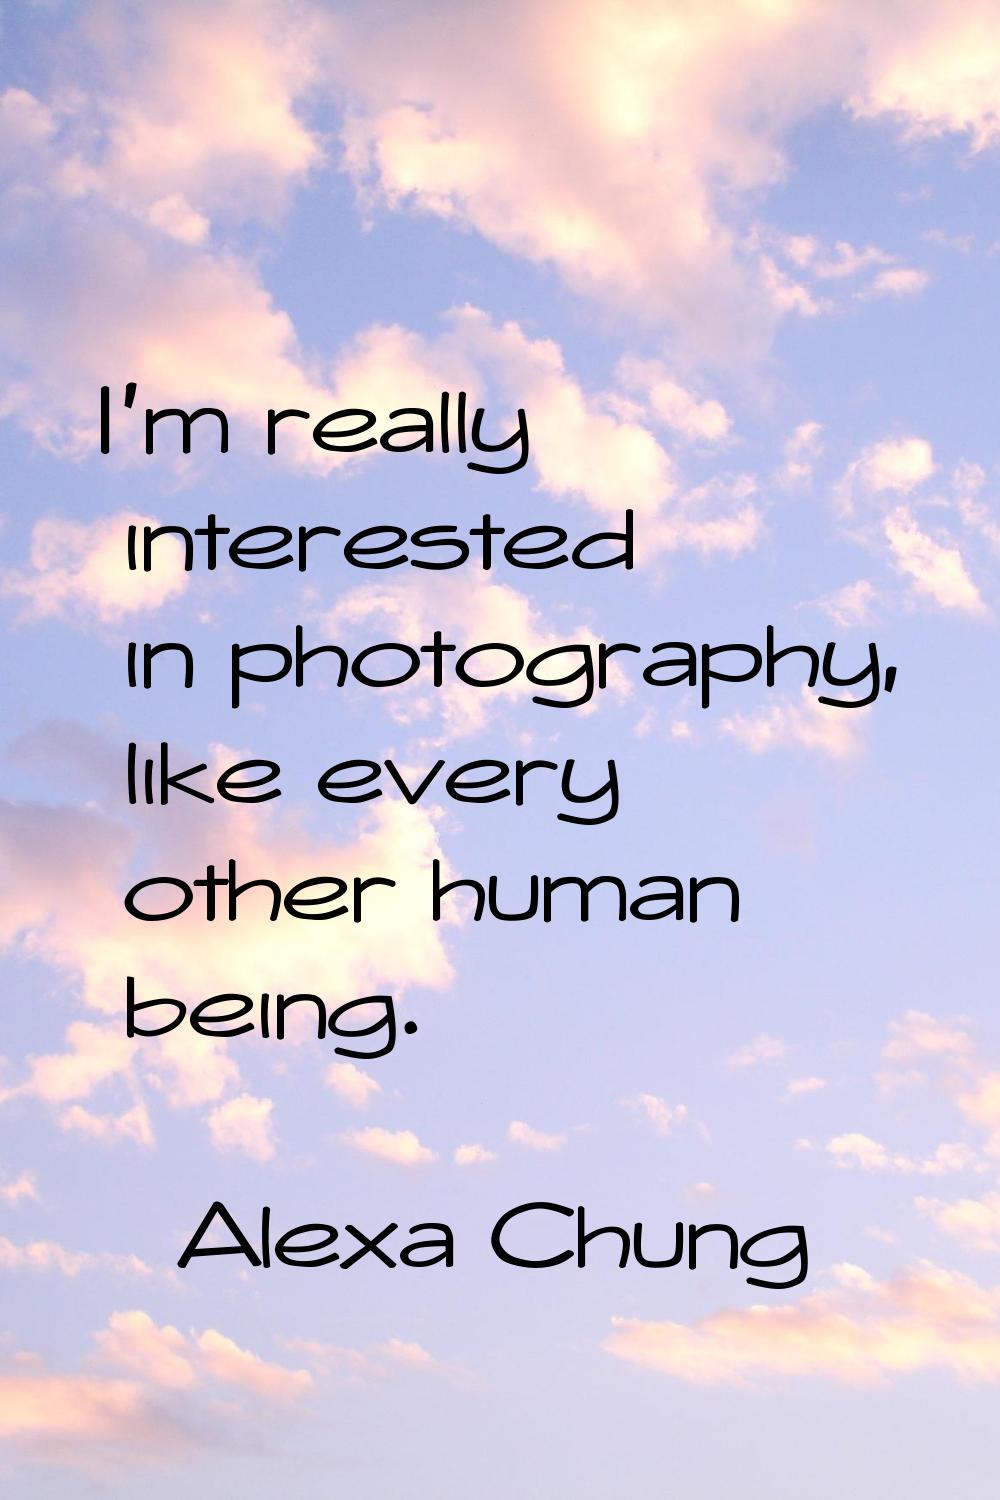 I'm really interested in photography, like every other human being.